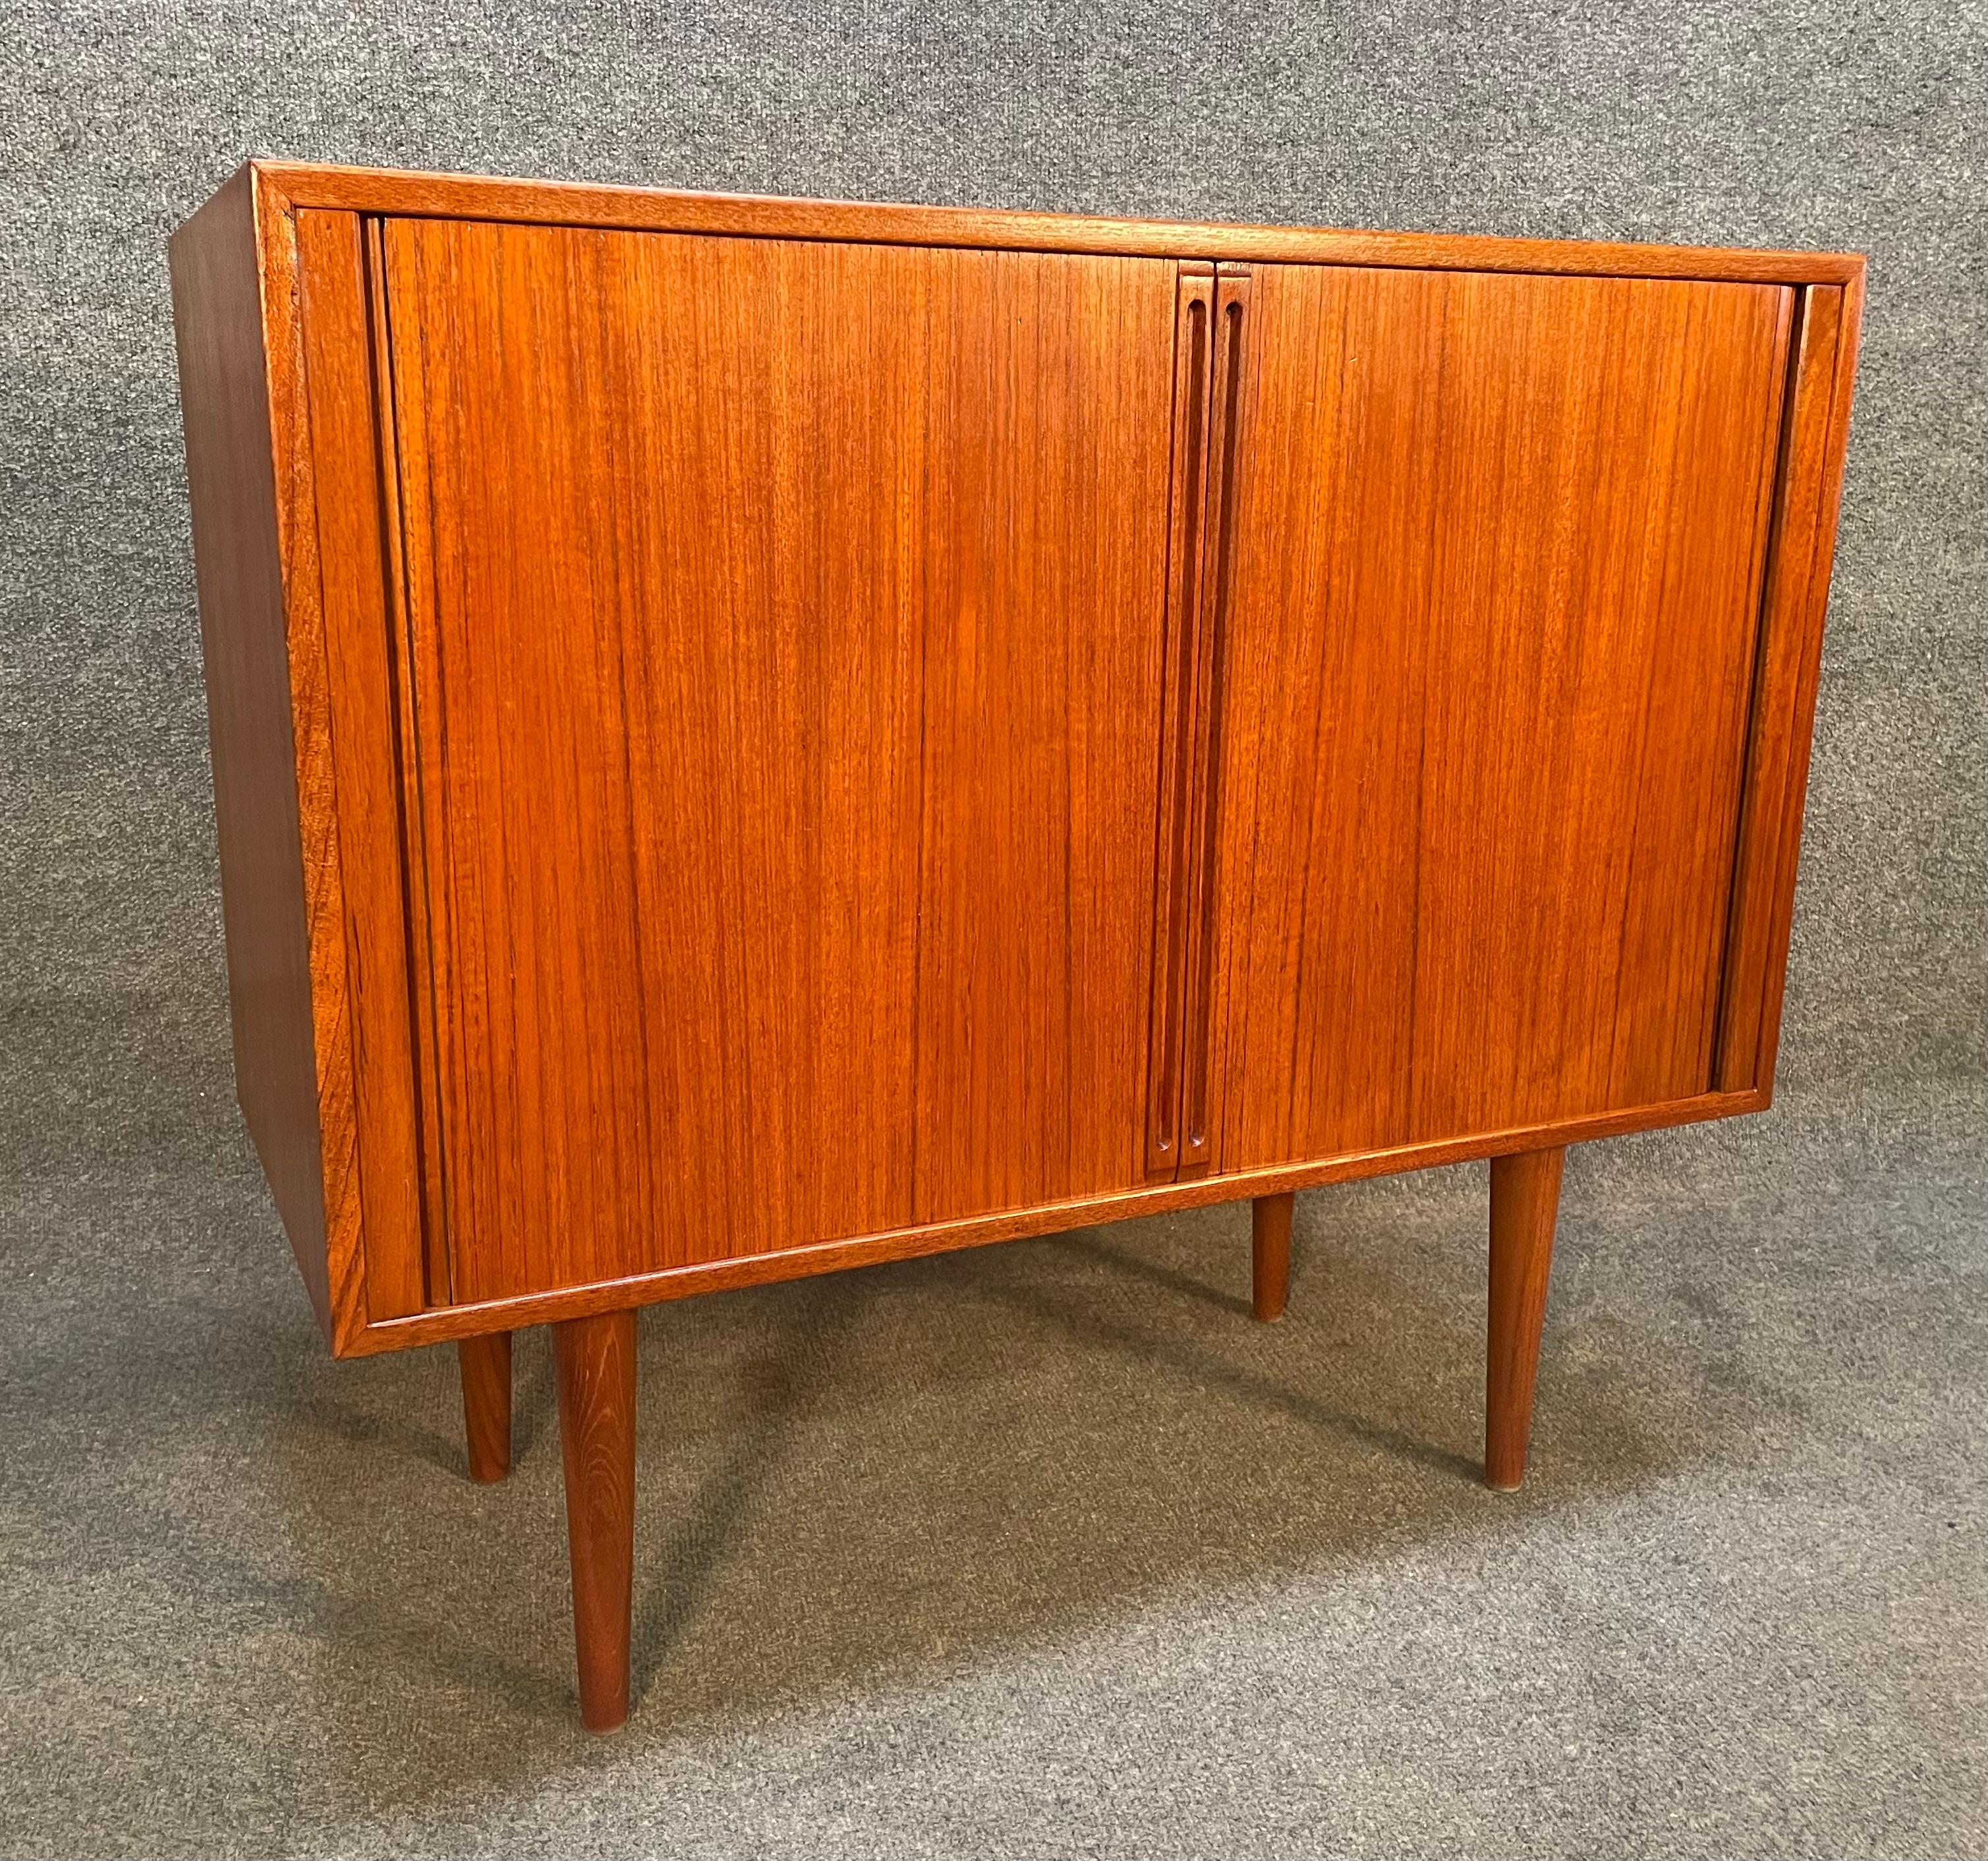 Here is a beautiful Scandinavian modern teak compact credenza designed by Kai Kristiansen and manufactured by Feldballes Mobelfabrik in Denmark in the 1960's.
This lovely cabinet, recently imported from Europe to California before its refinishing,